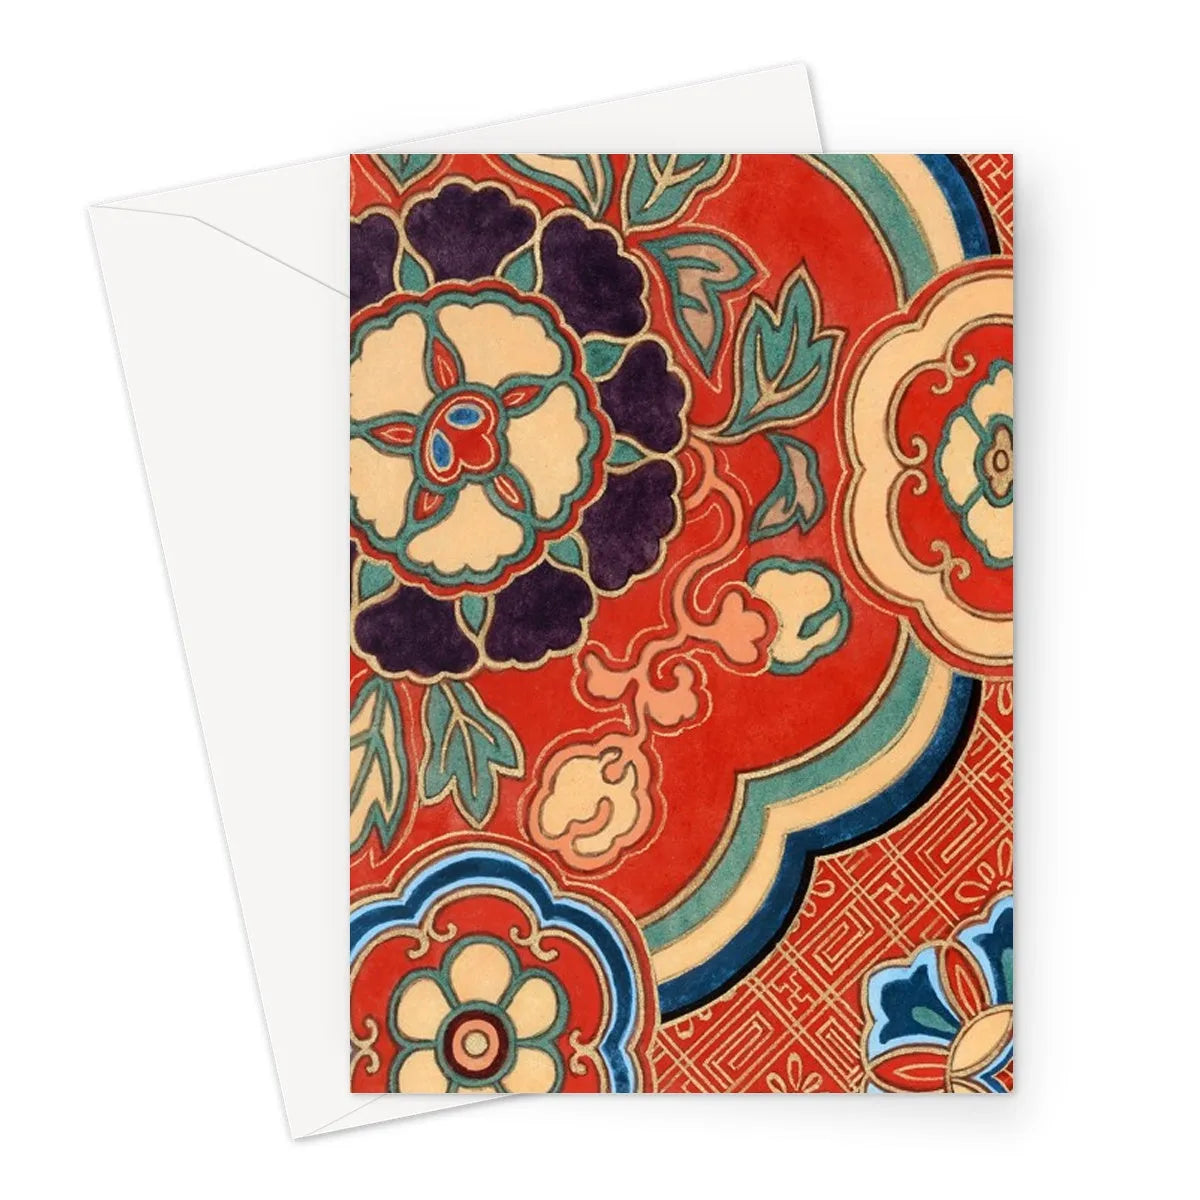 Ito Nishiki Kimono Pattern Greeting Card - A5 Portrait / 1 Card - Greeting & Note Cards - Aesthetic Art